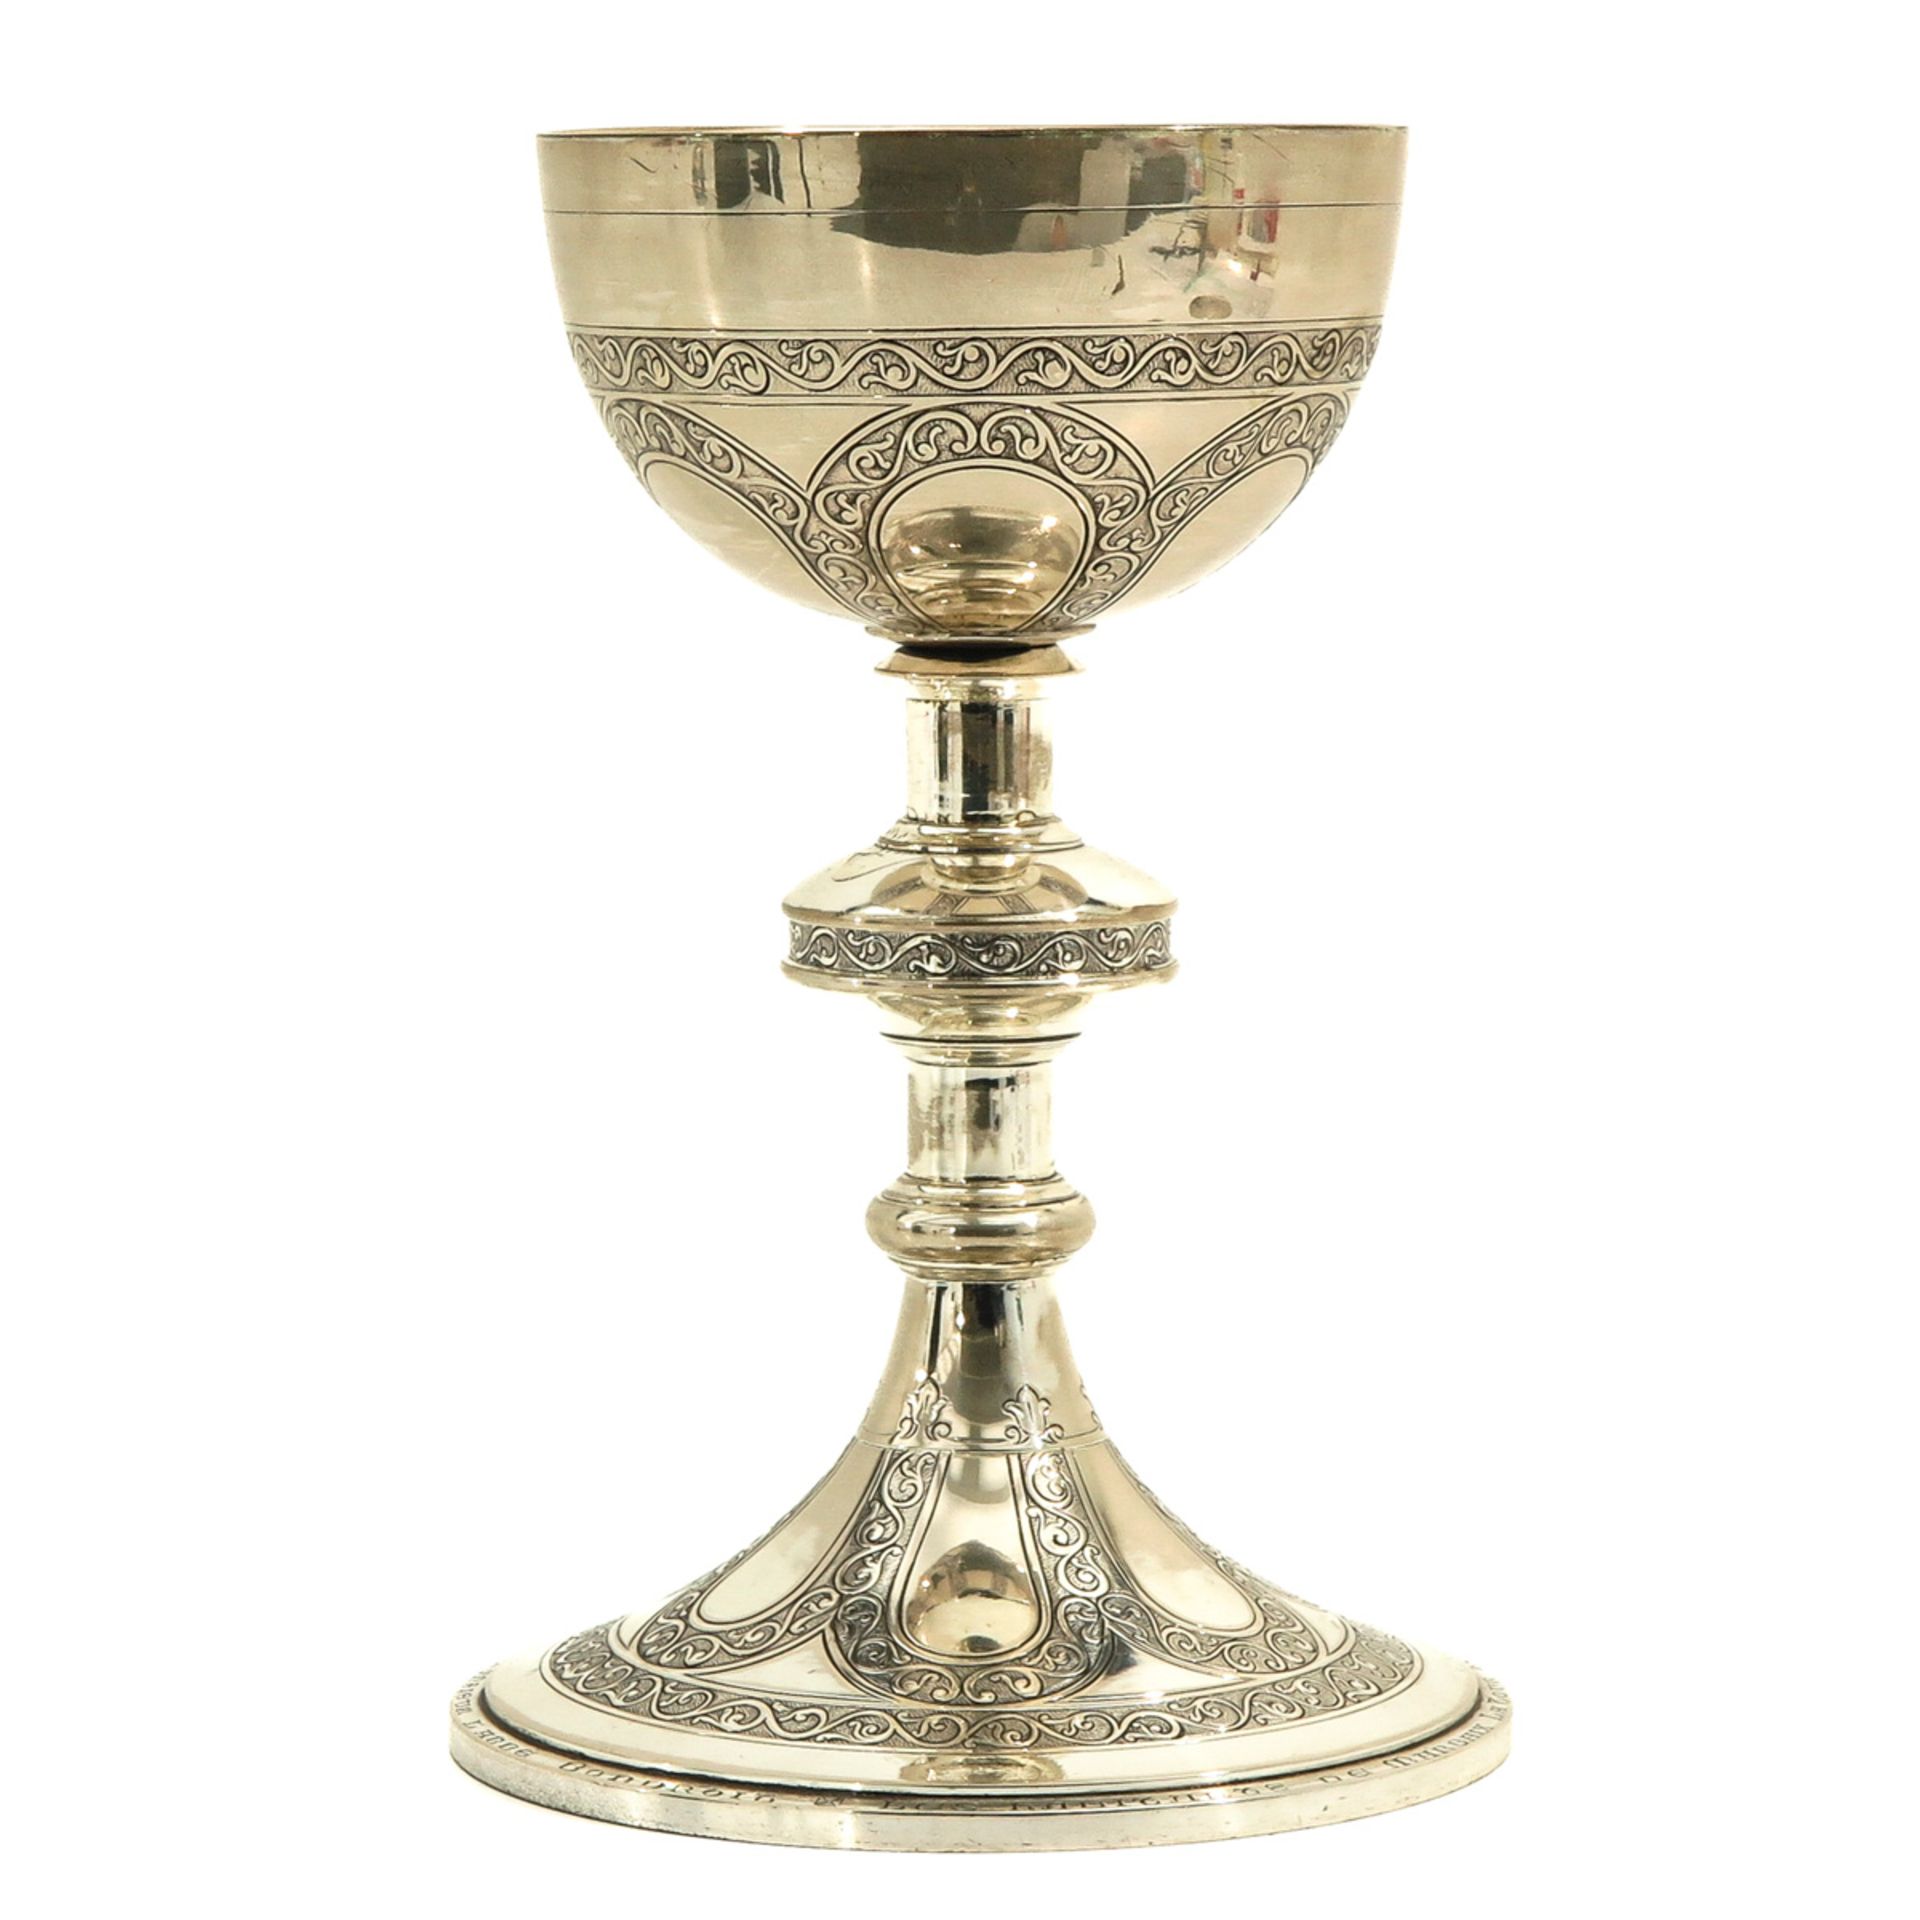 A Silver Chalice - Image 4 of 8